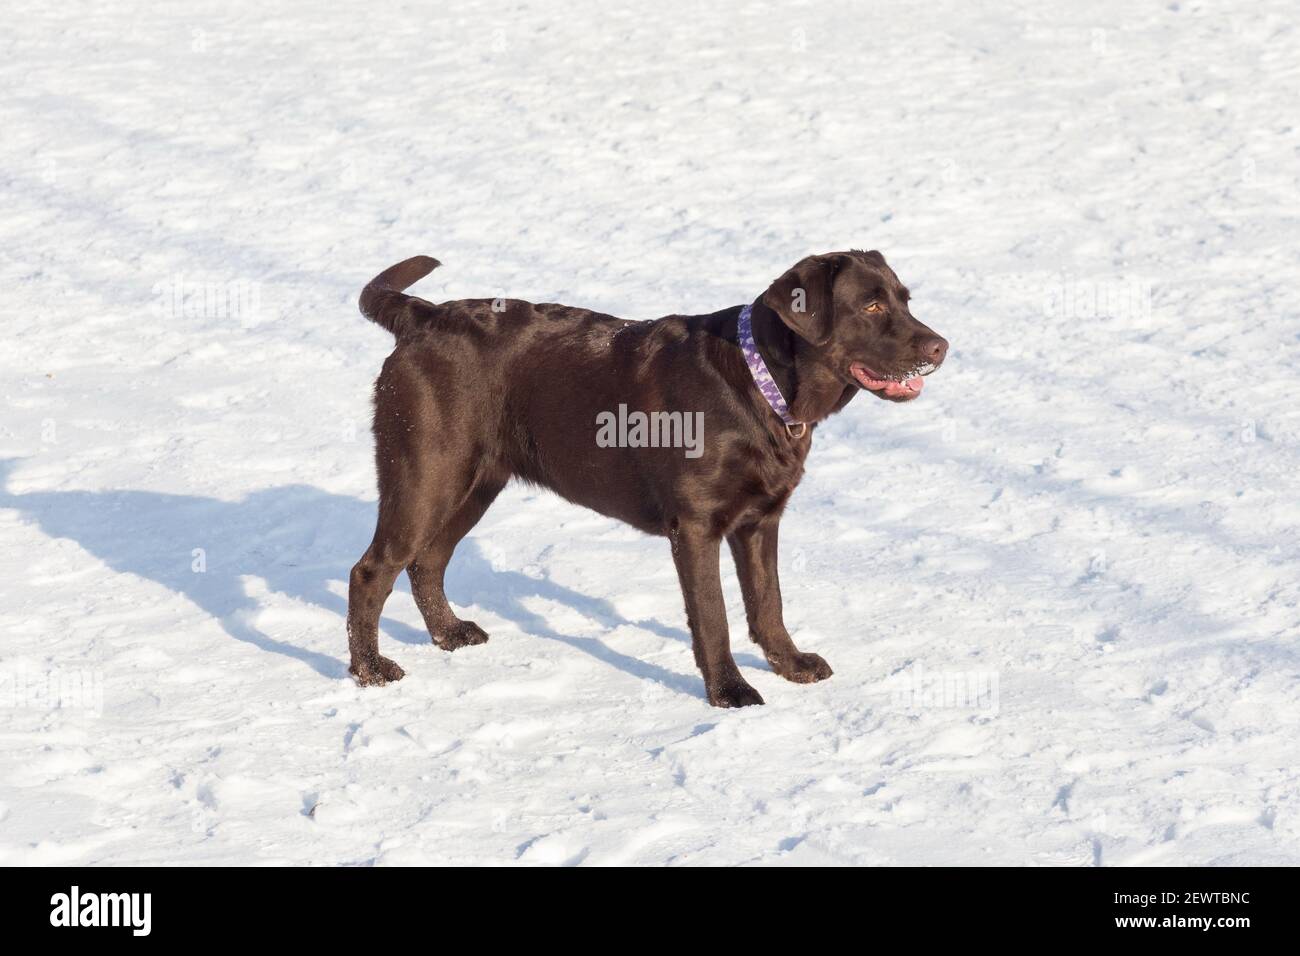 Chocolate labrador retriever is standing on white snow in the winter park. Pet animals. Purebred dog. Stock Photo